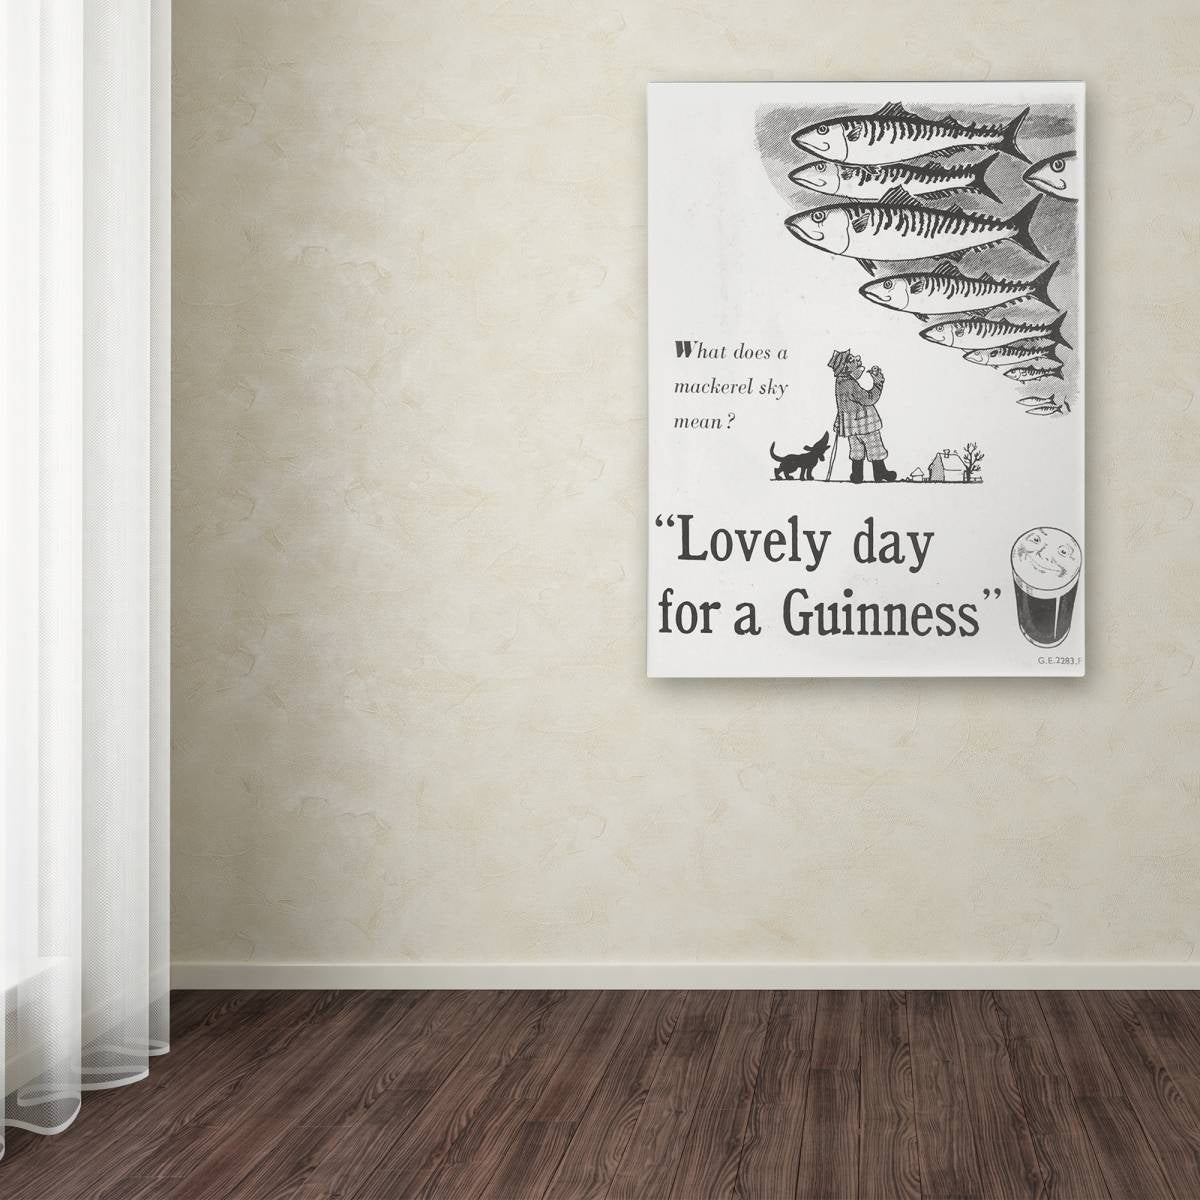 Lovely day for a Guinness - Guinness Brewery 'Lovely Day For A Guinness V' canvas art. Experience the iconic taste of Guinness with this stunning artwork featuring the renowned beer brand. Perfect for any beer enthusiast or lover of brewery merchandise, this canvas print